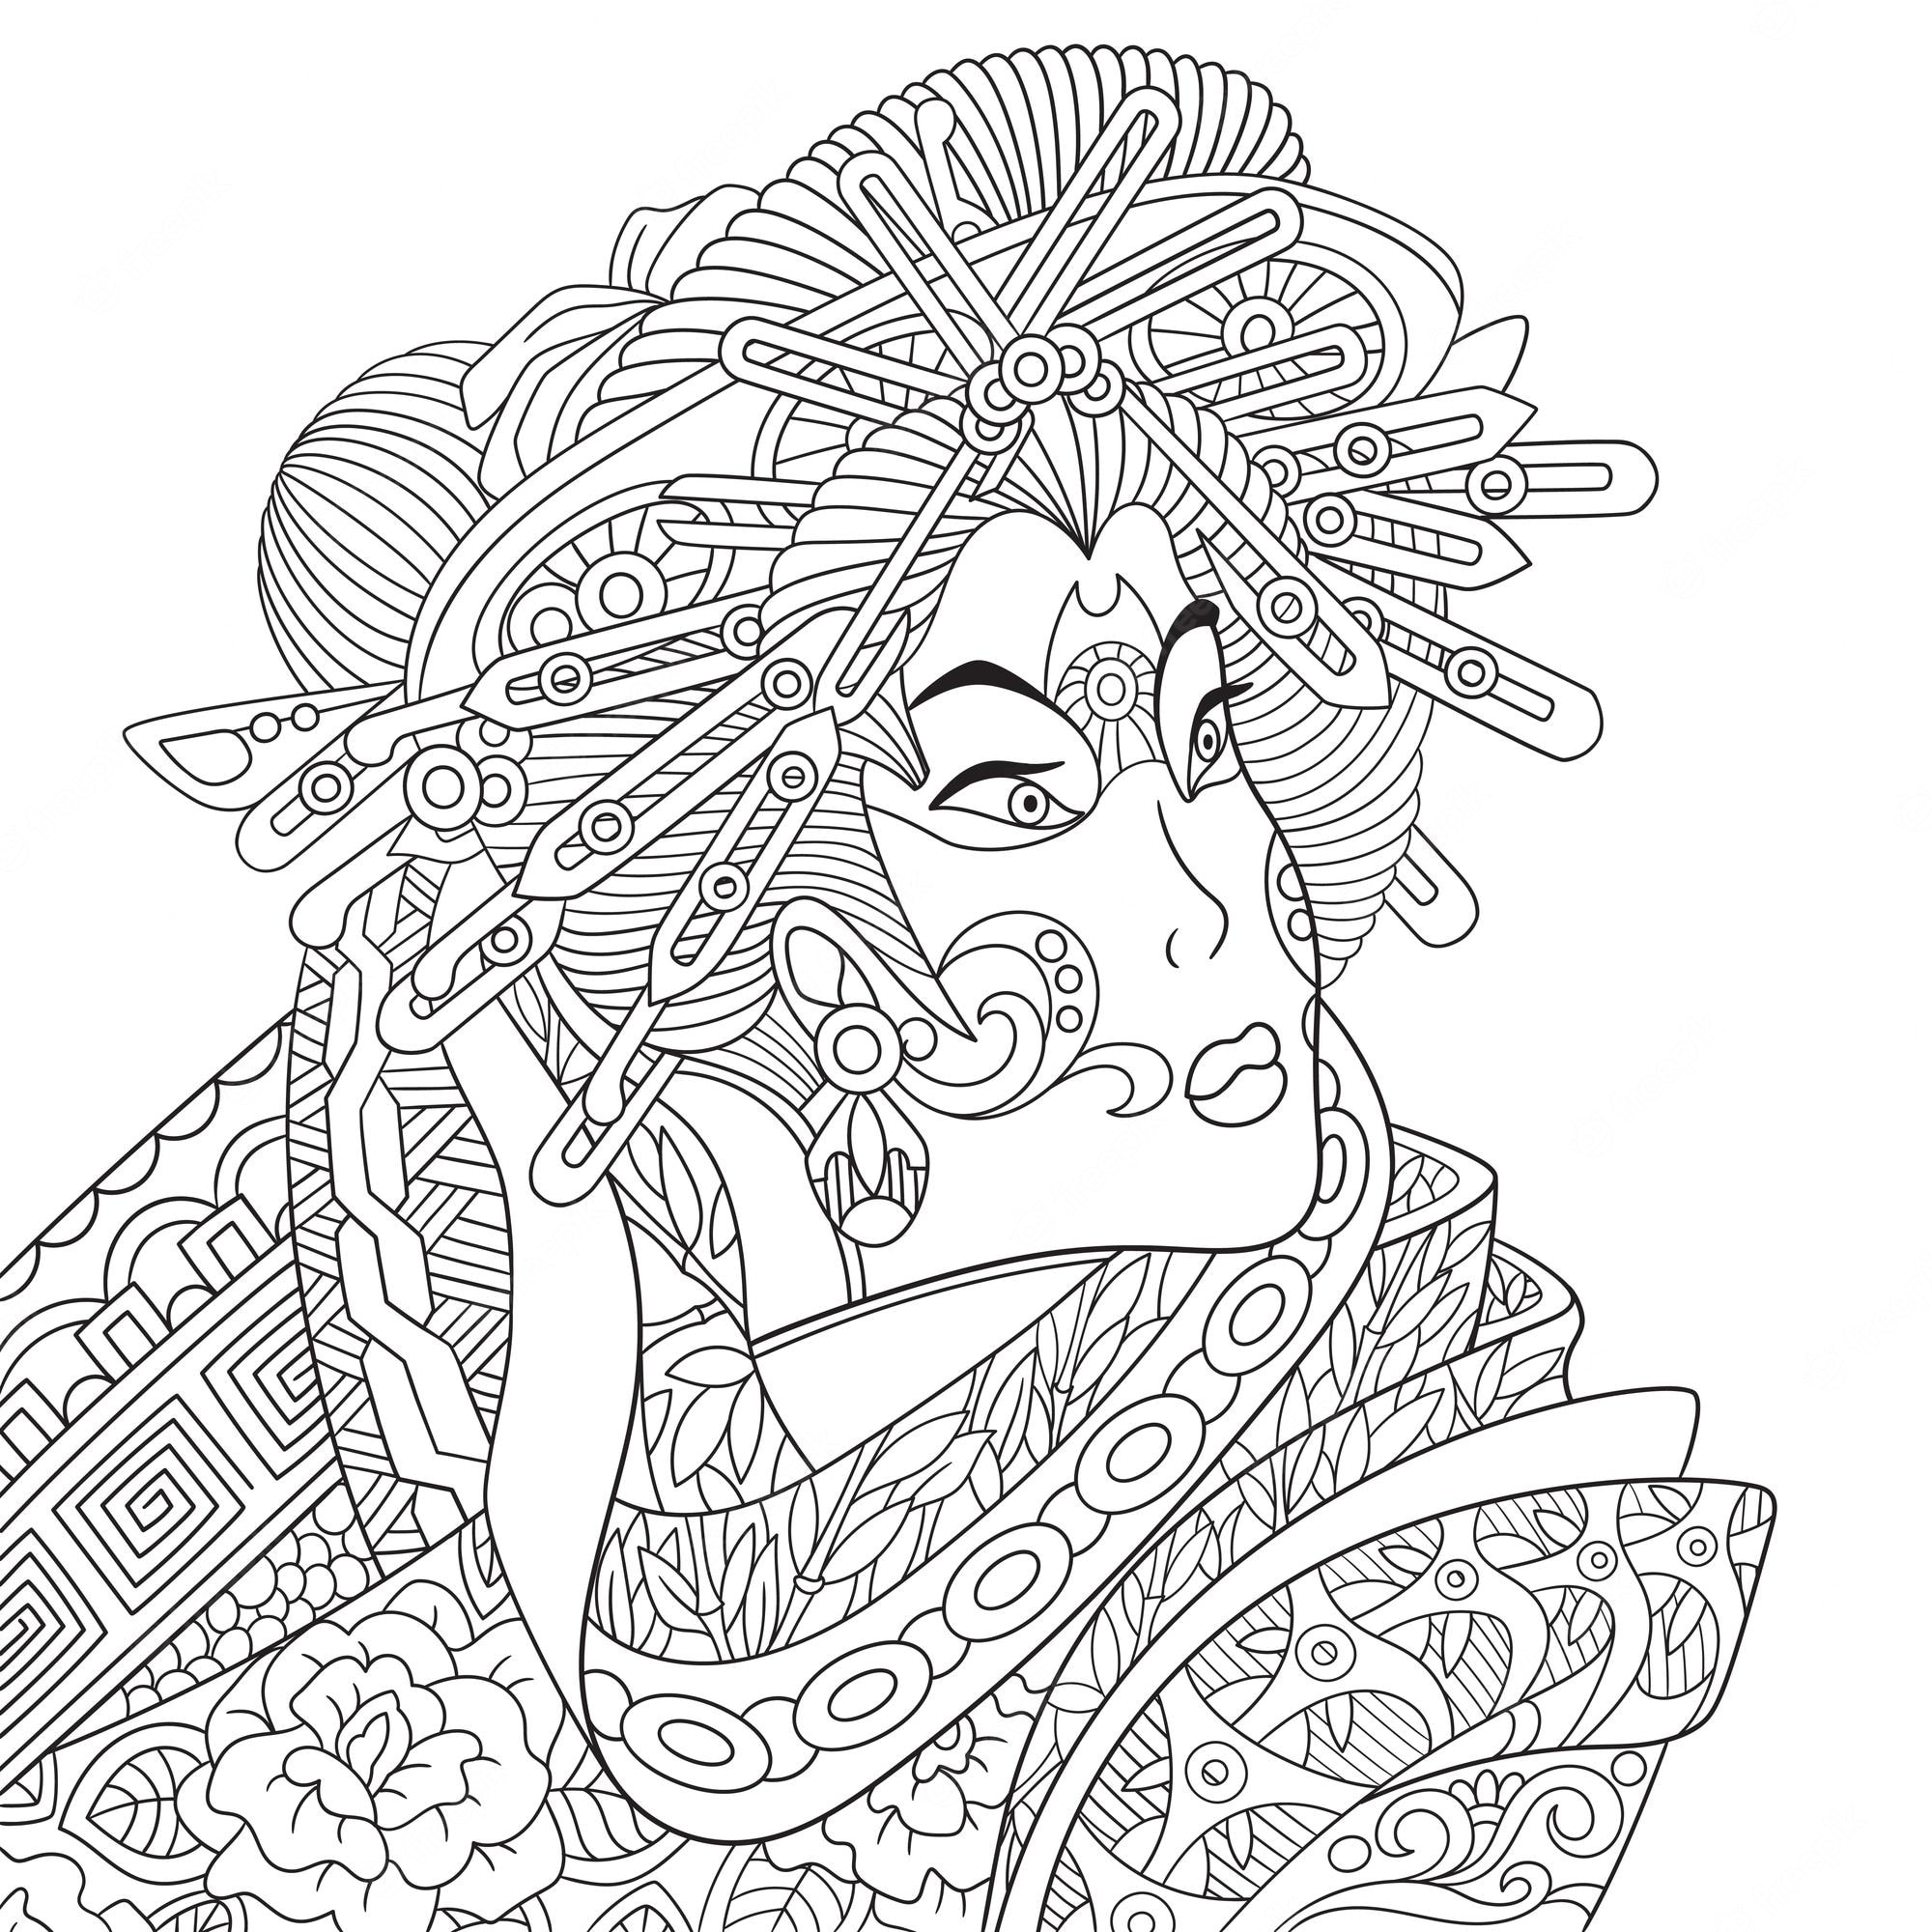 Premium Vector | Geisha woman. zentangle colouring illustration. line art  design for adult coloring book page.